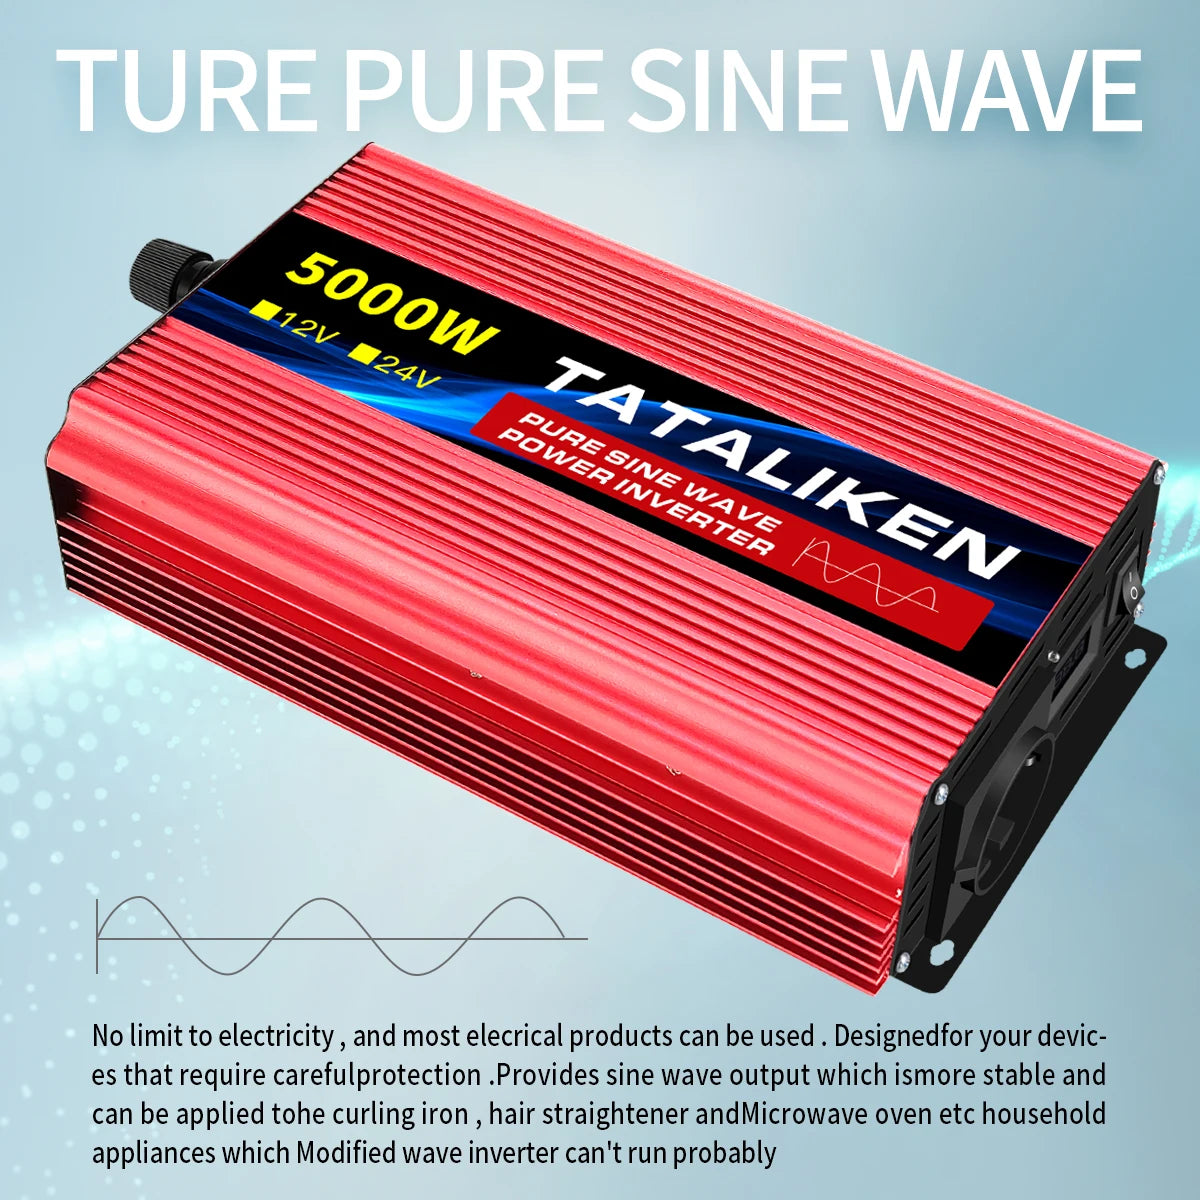 Pure sine wave inverter supports sensitive devices and high-power appliances with stable output.